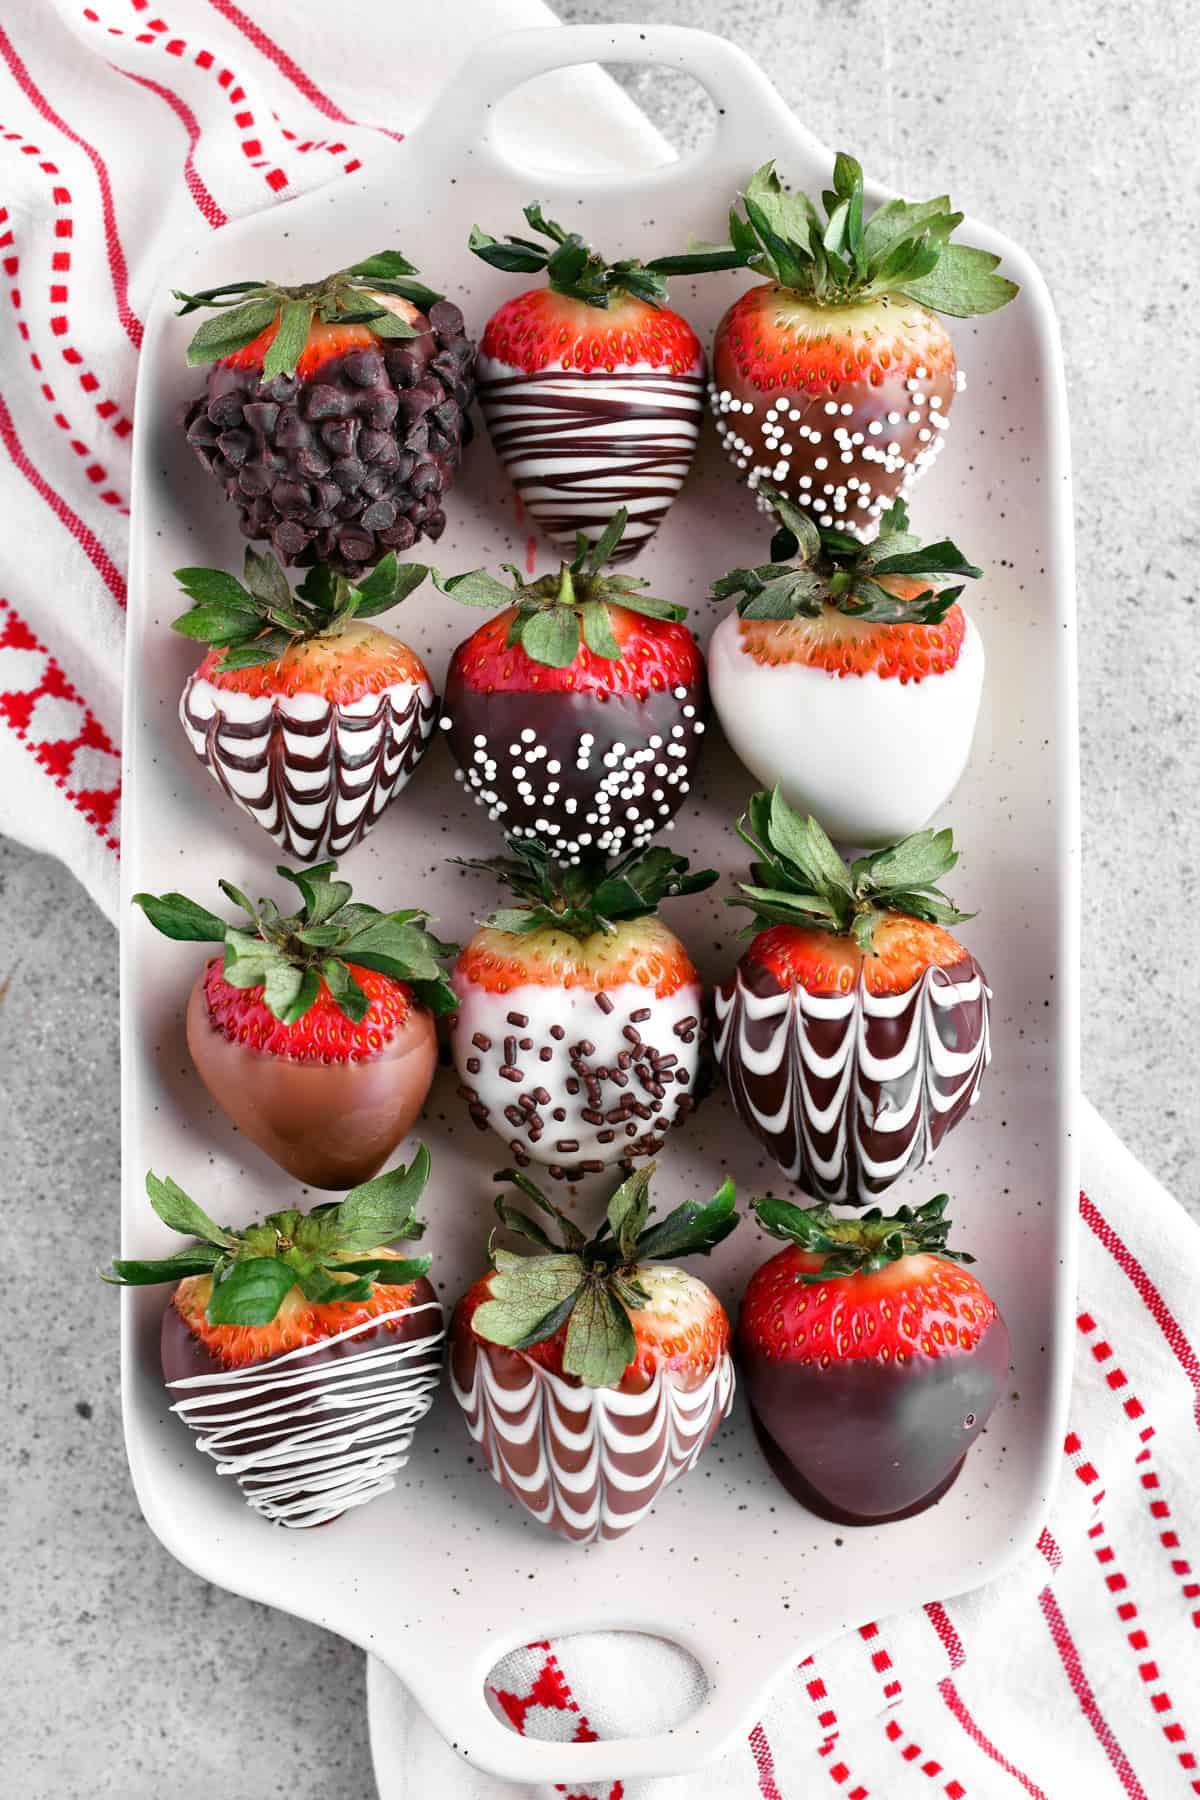 Chocolate covered strawberries with fun chocolate designs